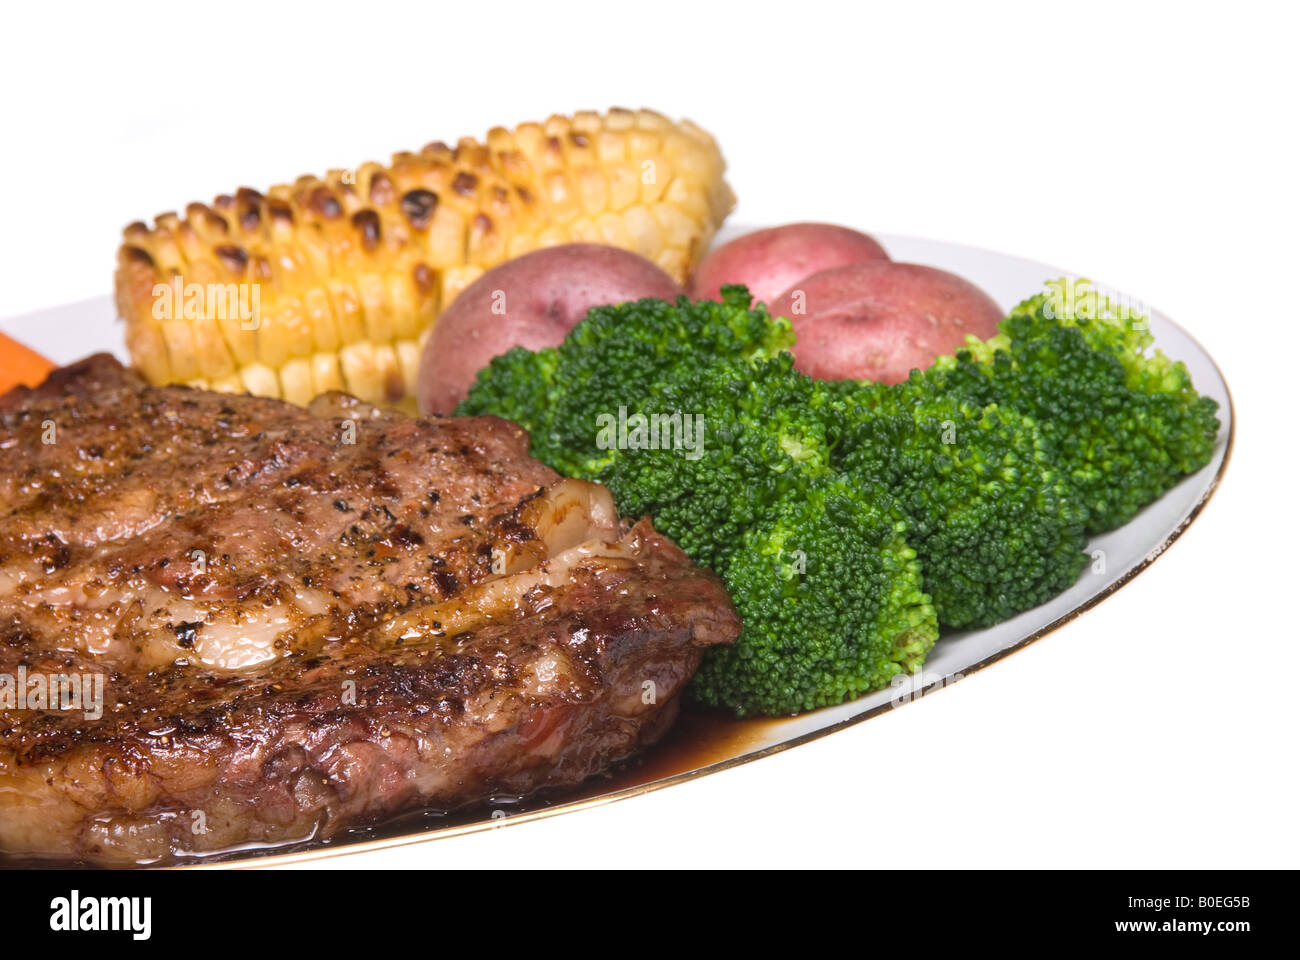 A delicious steak dinner consisting of a filet baby carrots broccoli baby potatoes and corn on the cob Stock Photo